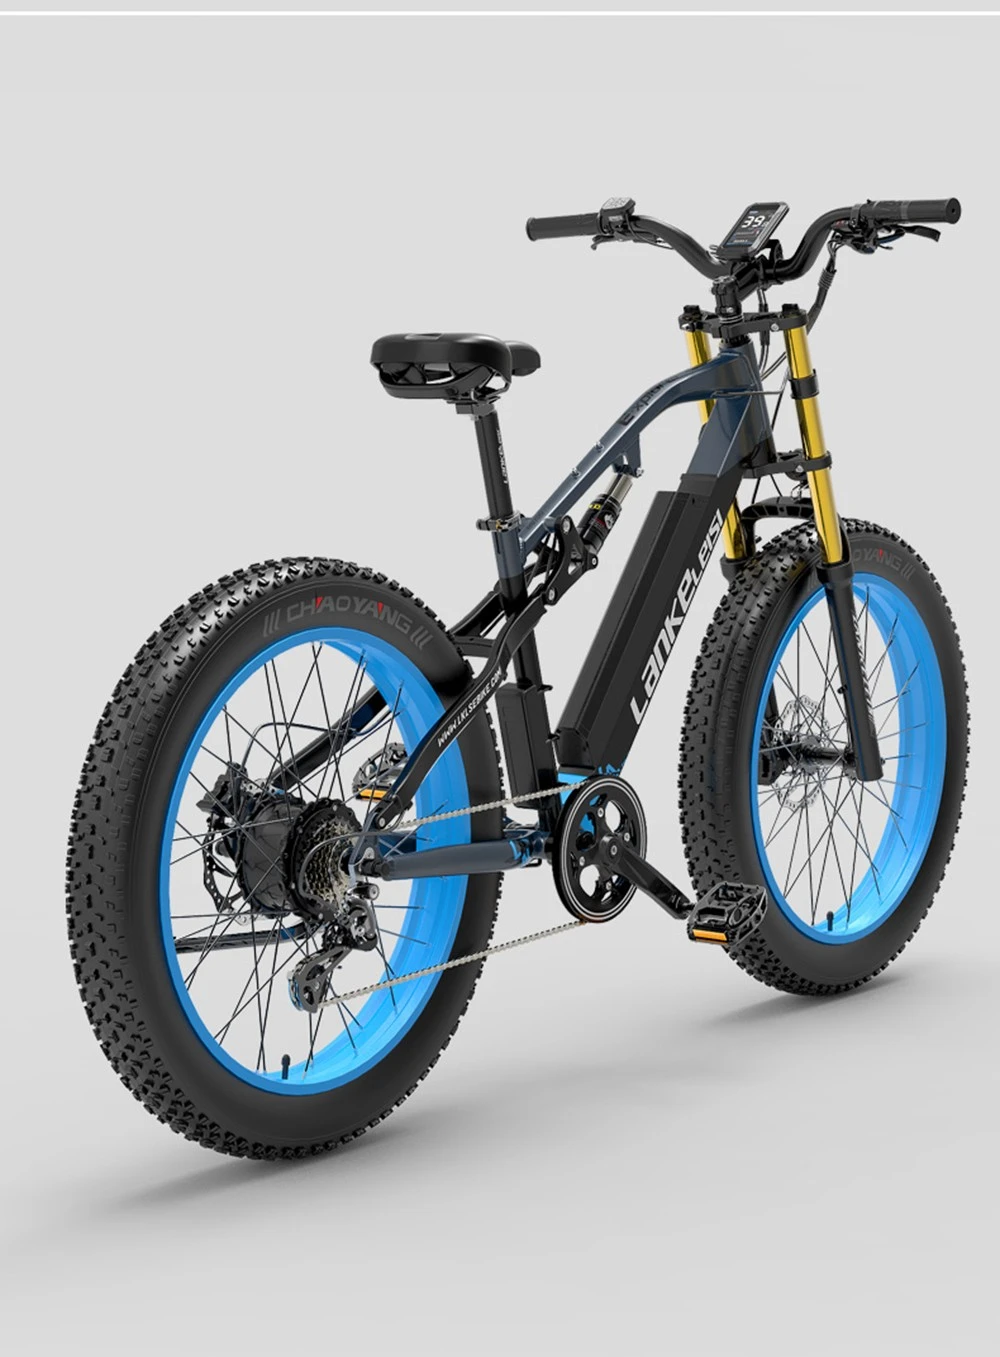 LANKELEISI RV700 16Ah 48V 1000W Electric Bicycle 26inch 42km/h Max speed Max Load 150kg